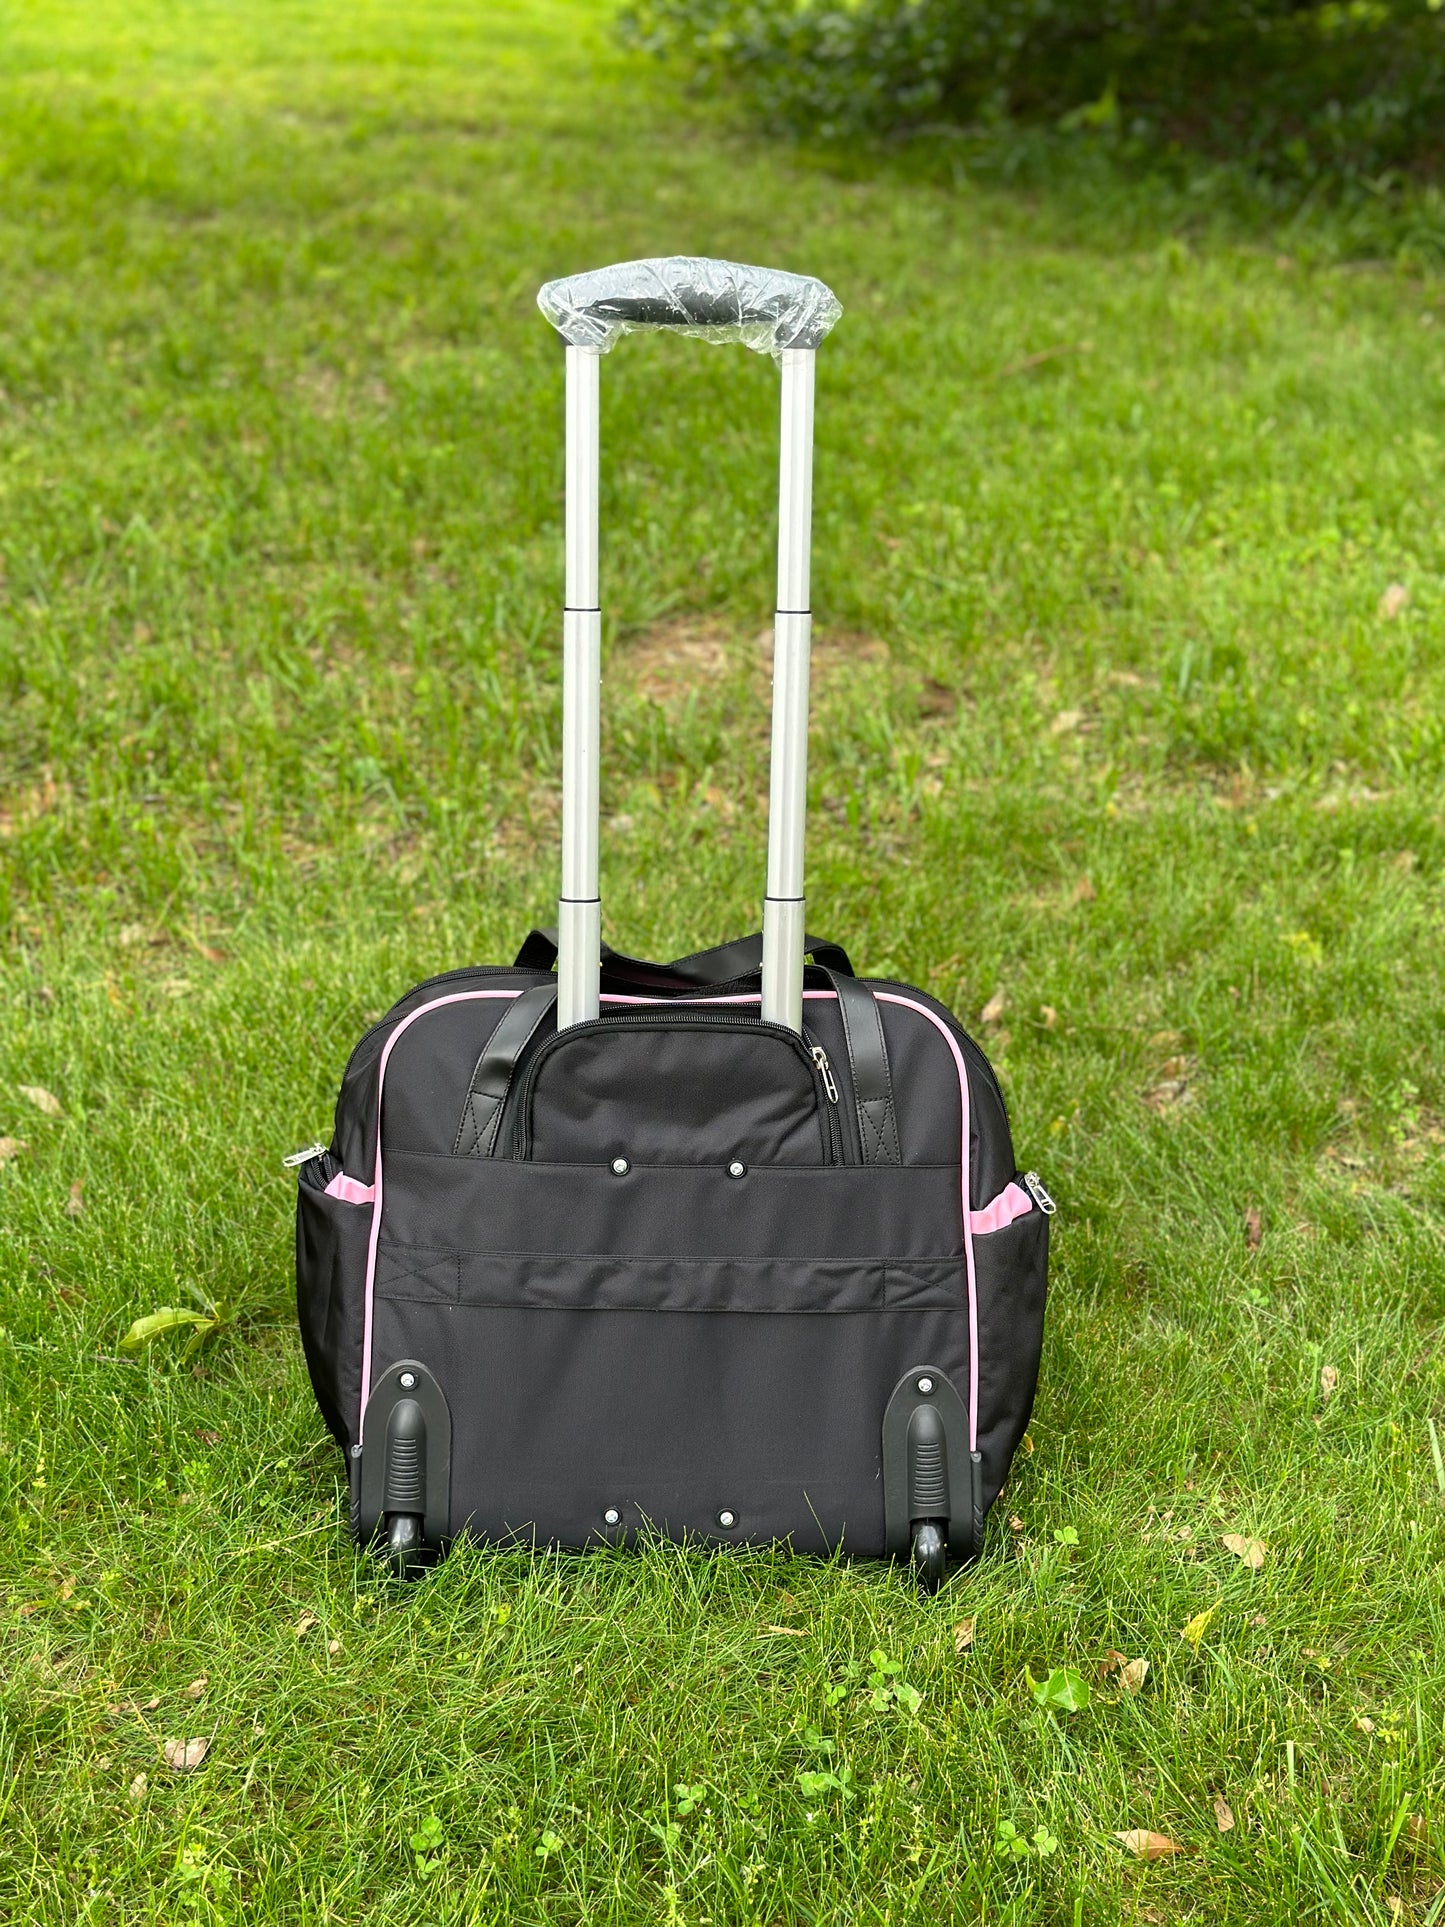 Alpha Kappa Alpha (AKA) Laptop with Trolley- Luggage/cabin Bag for travelling.- authorized vendor